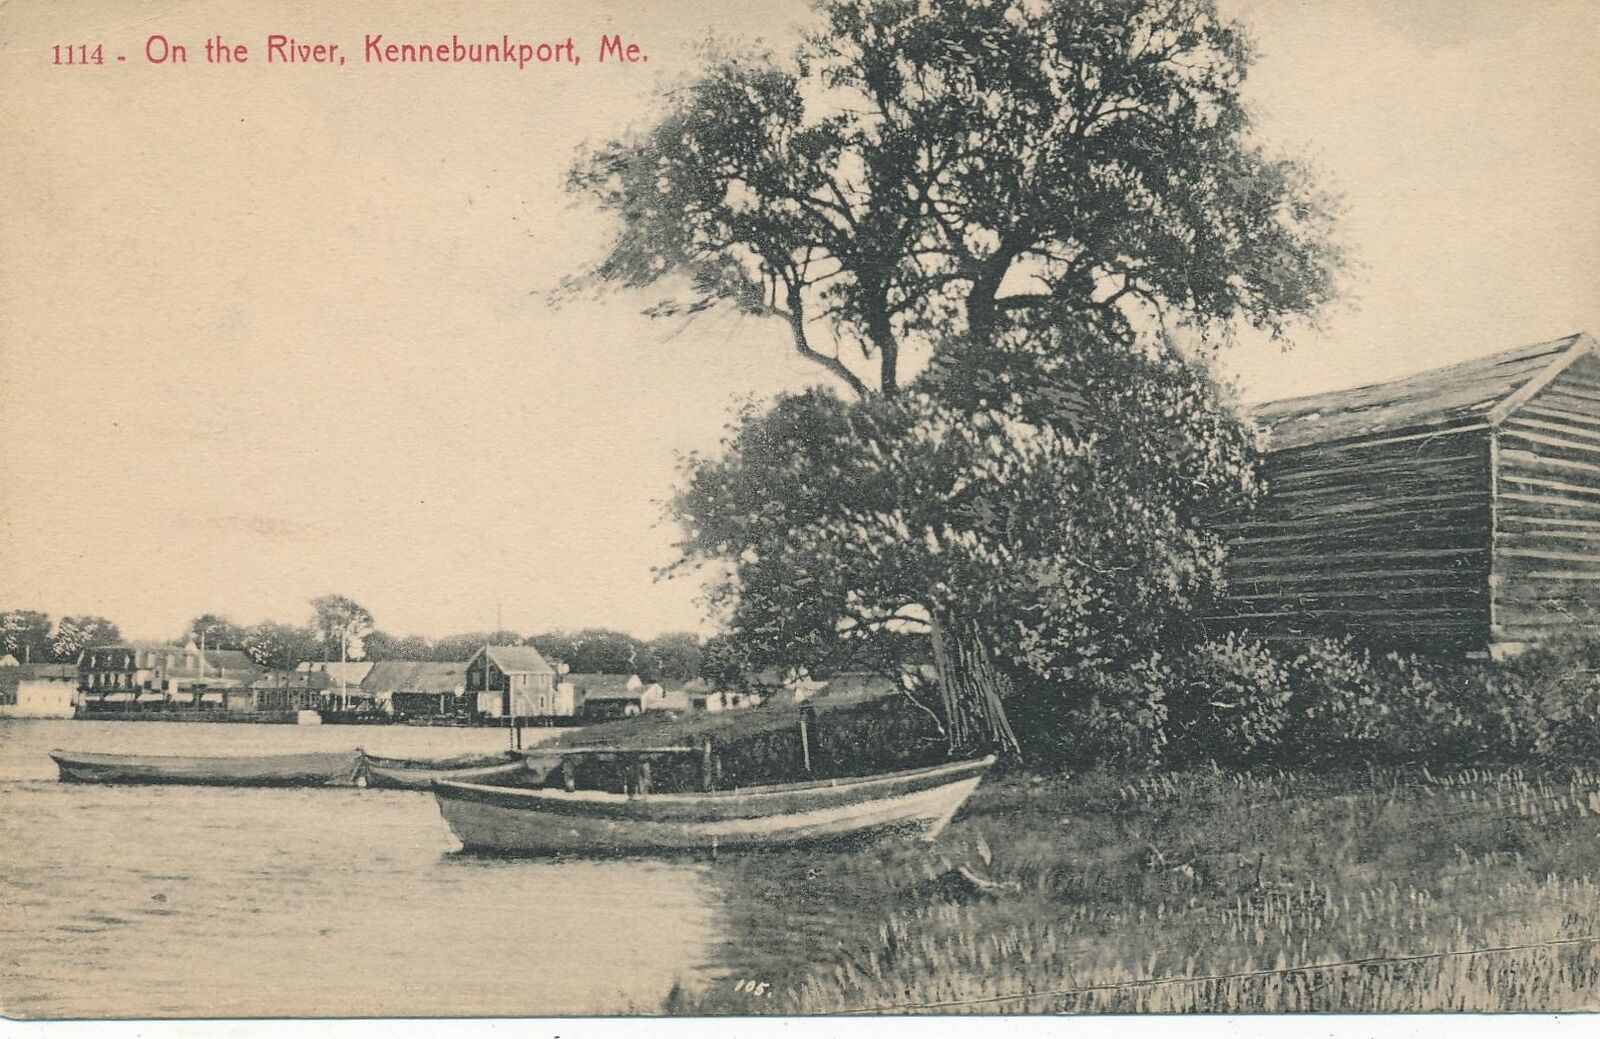 KENNEBUNKPORT ME - On The River - 1916